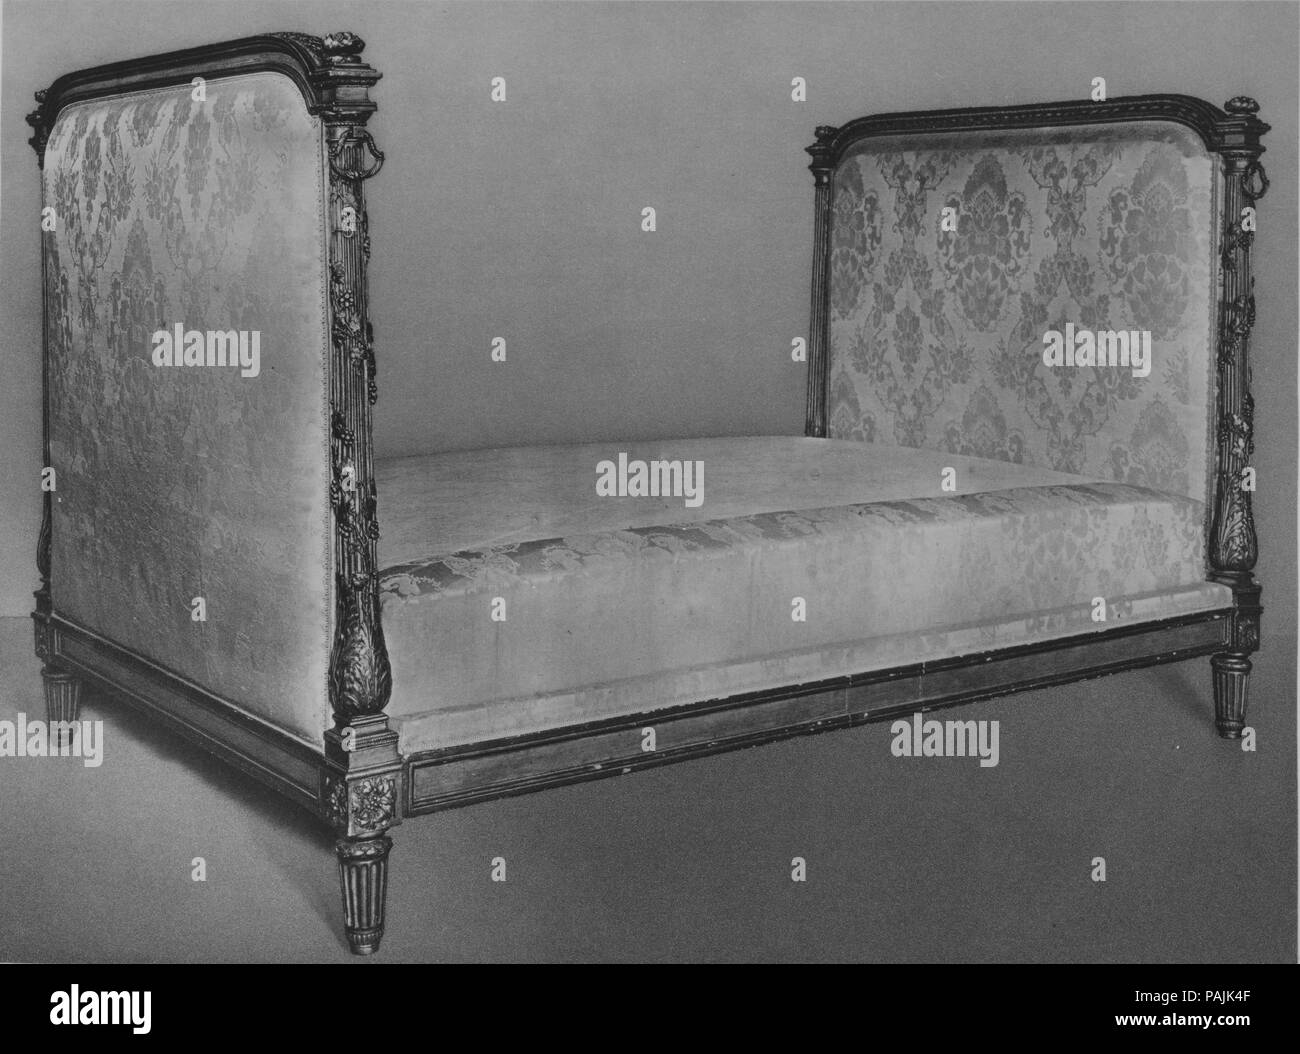 Daybed. Culture: French, Paris. Dimensions: Overall: 55 3/4 × 59 1/4 × 88 in. (141.6 × 150.5 × 223.5 cm). Maker: attributed to Georges Jacob (French, Cheny 1739-1814 Paris). Date: ca. 1780-85. Museum: Metropolitan Museum of Art, New York, USA. Stock Photo